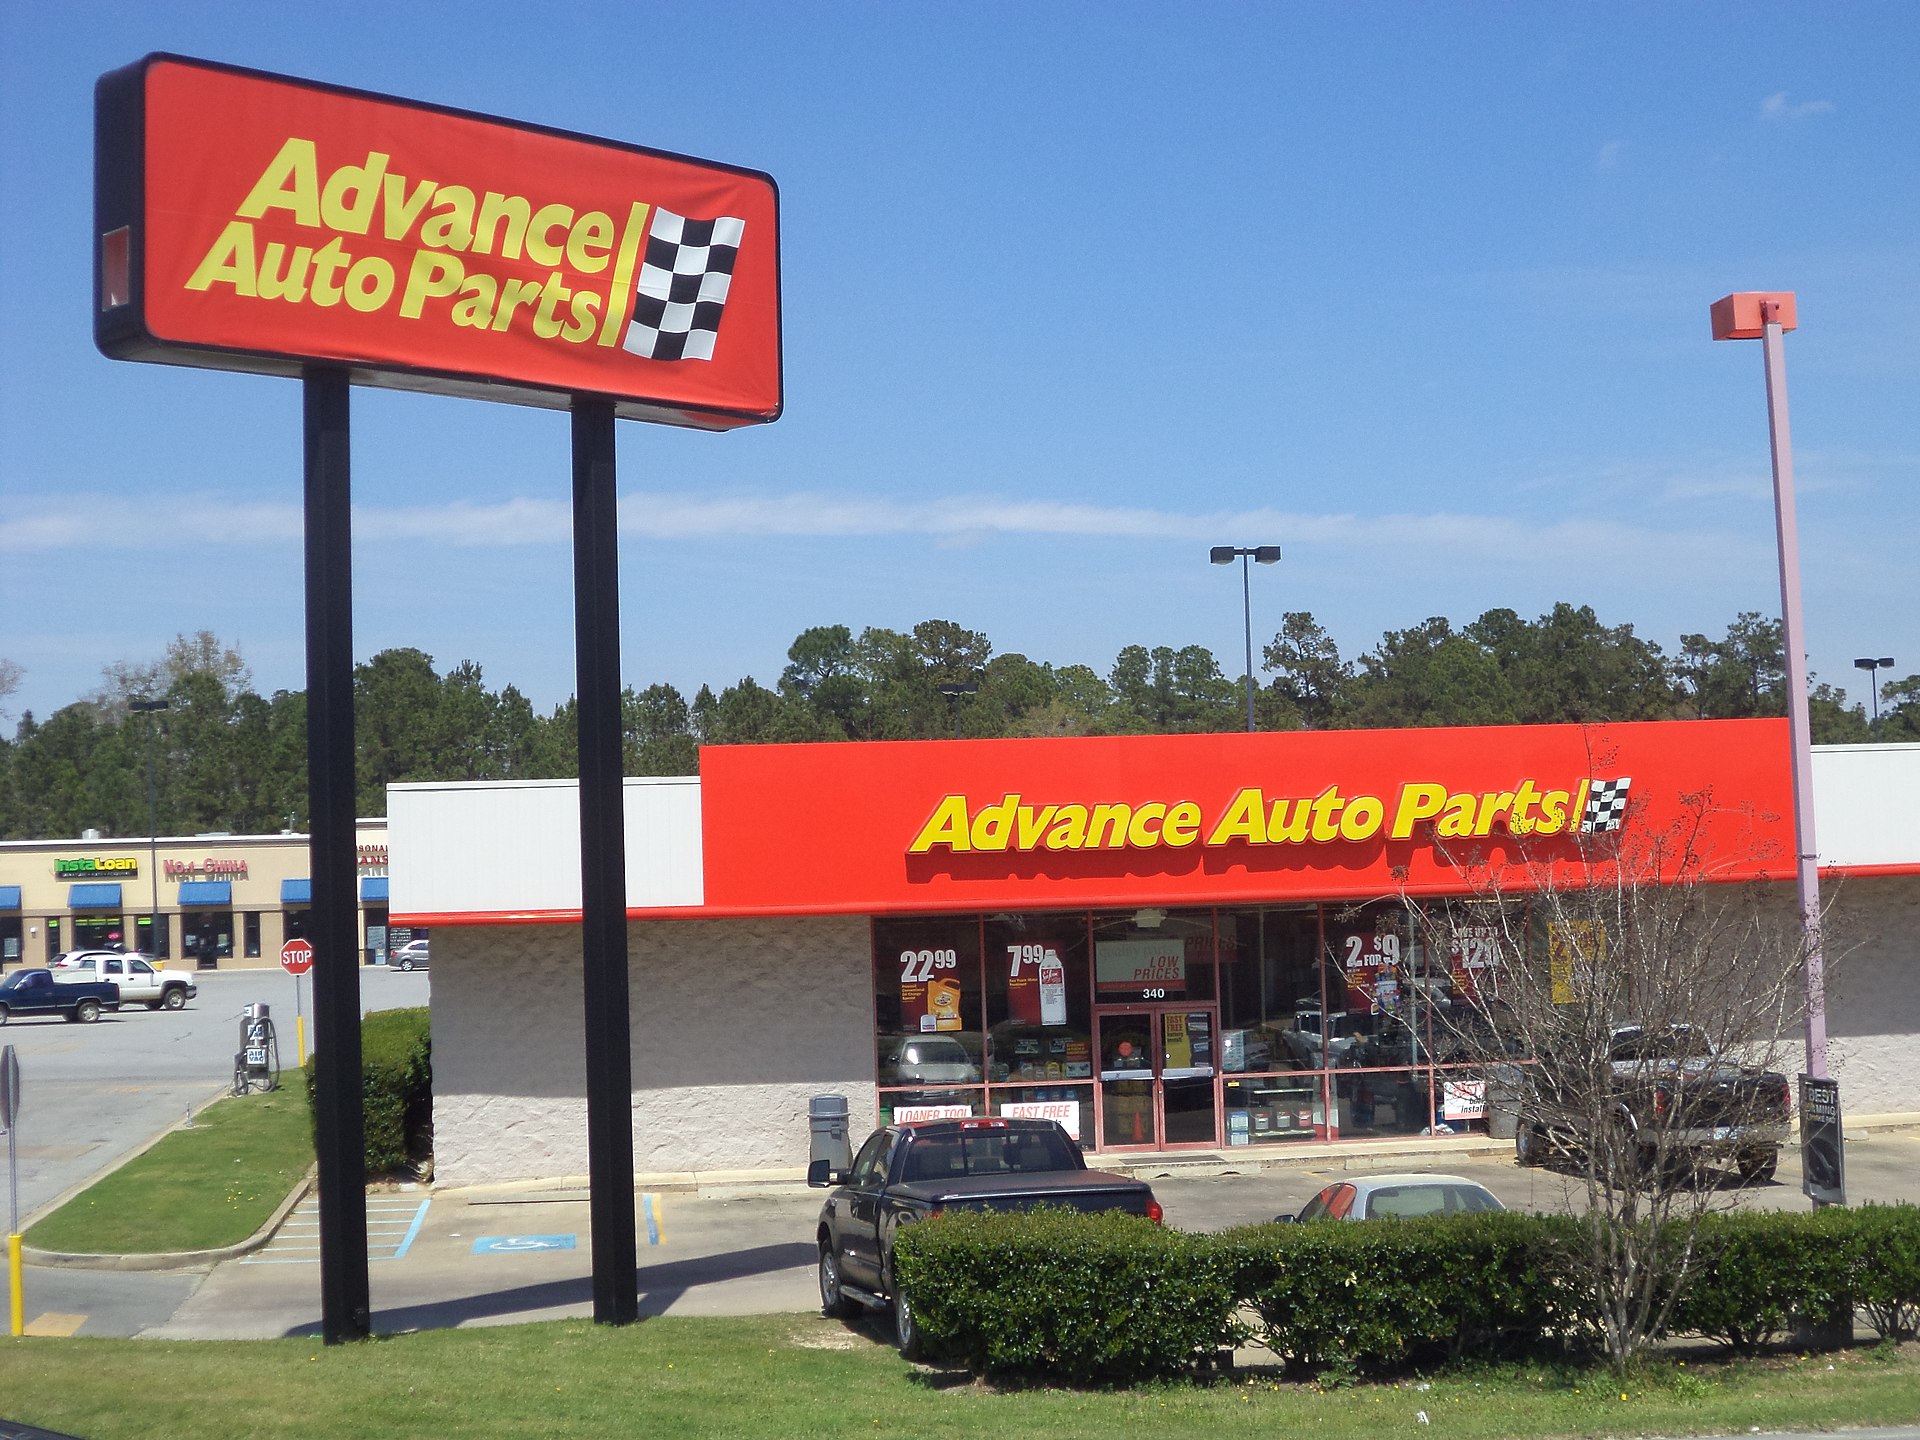 Does Advance Auto Parts take Apple Pay?